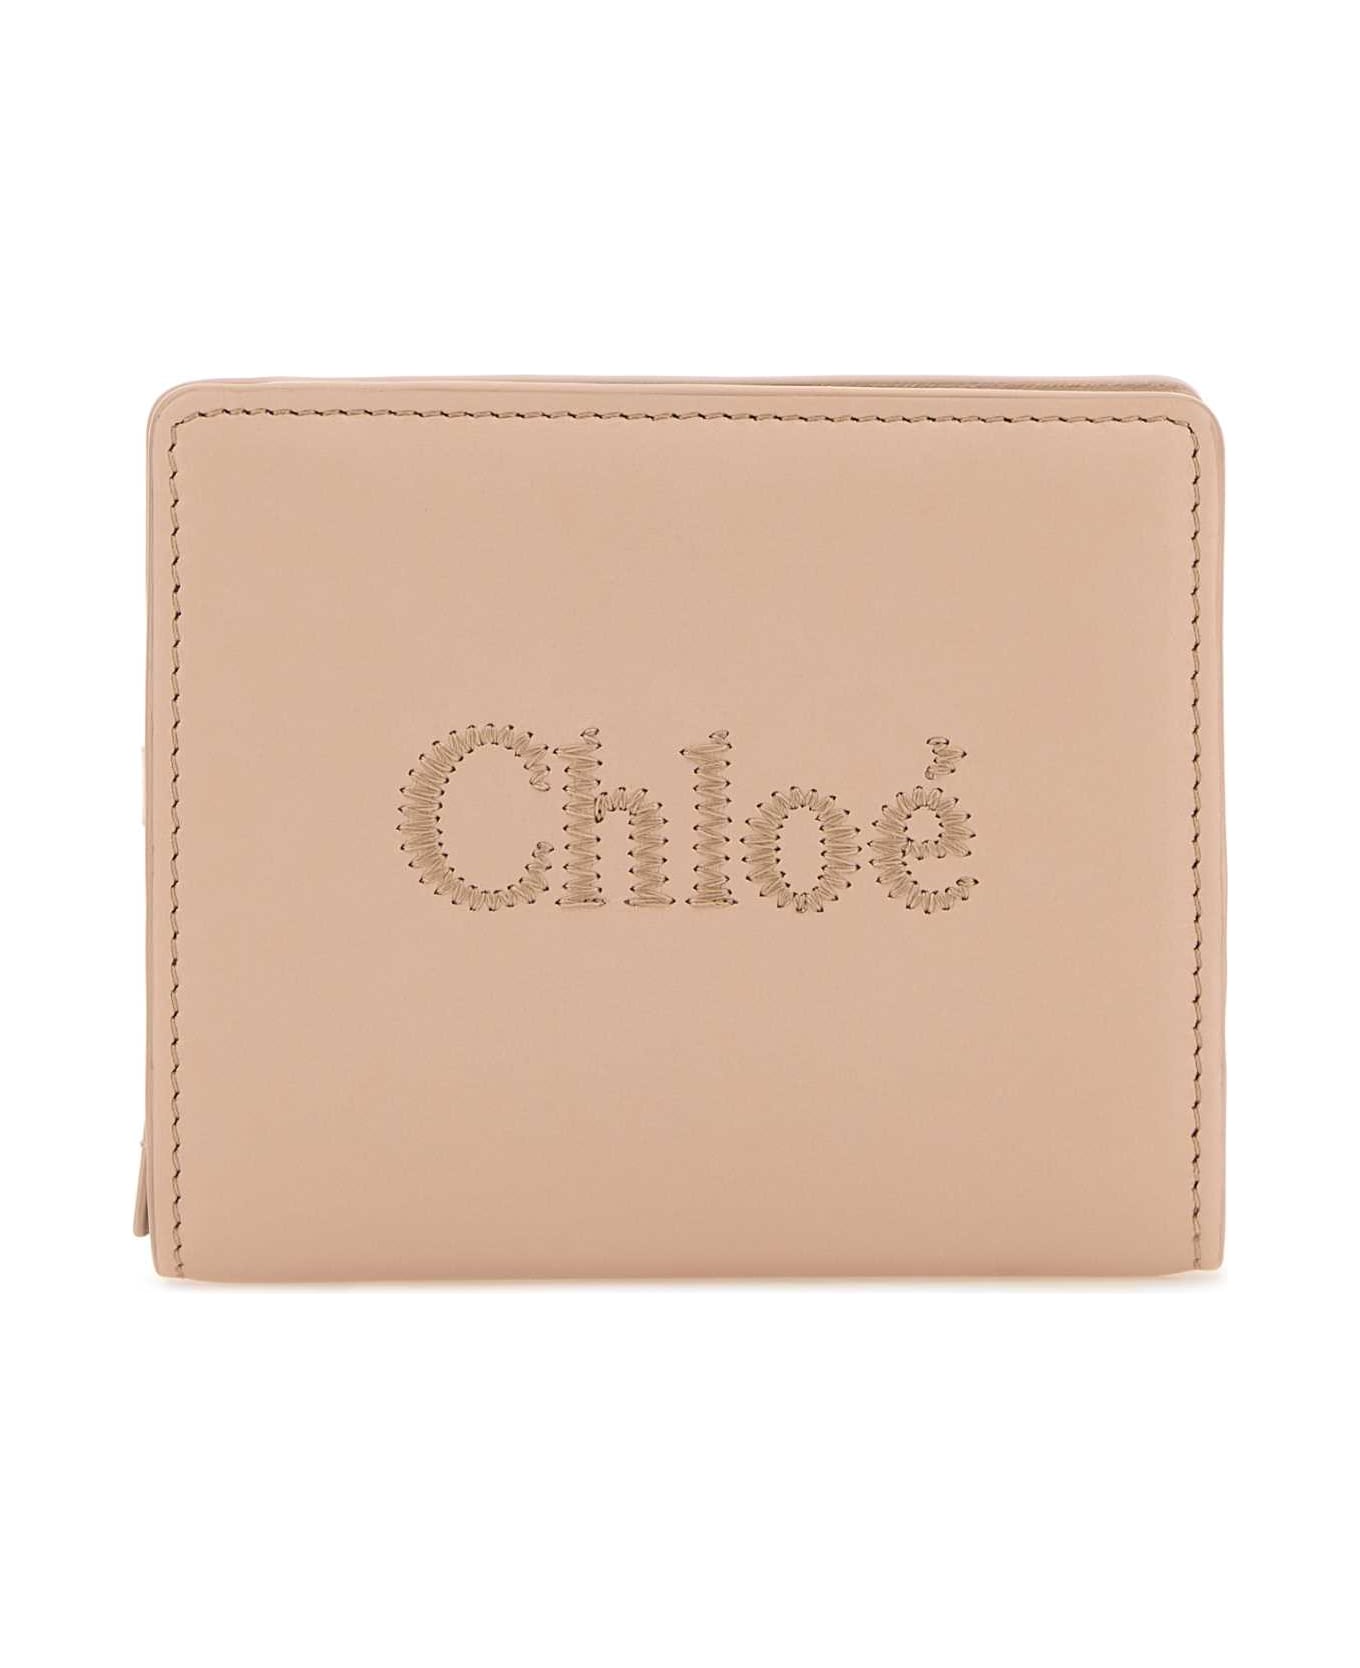 Chloé Skin Pink Leather Wallet - CEMENTPINK 財布